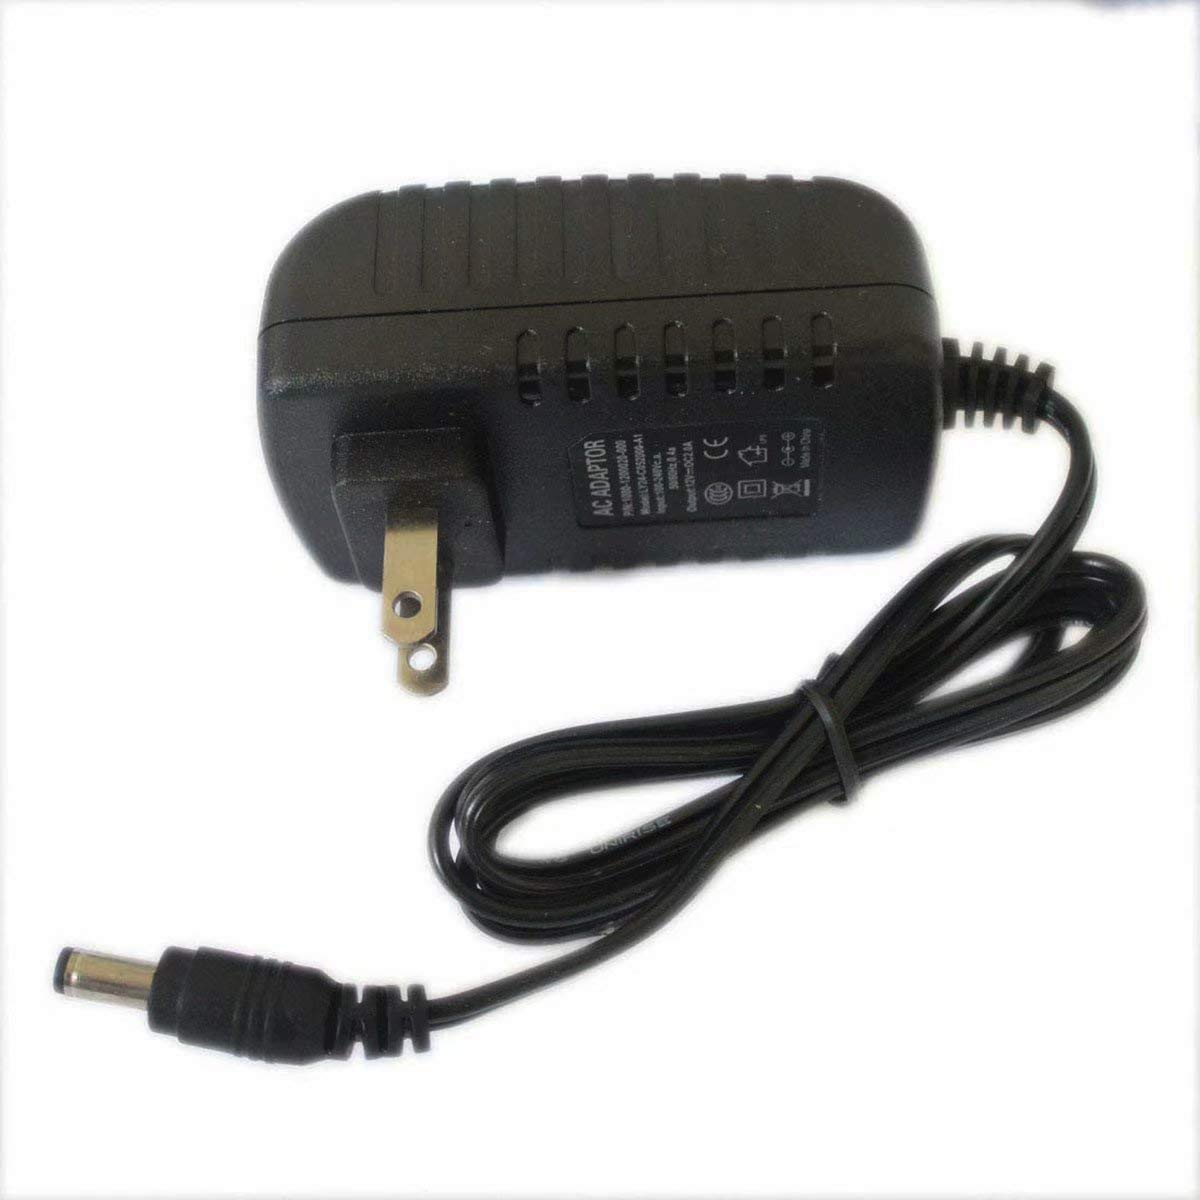 AC Adapter for Kohler Malleco Touchless R77748 K-R77748-SD Kitchen Sink Faucet